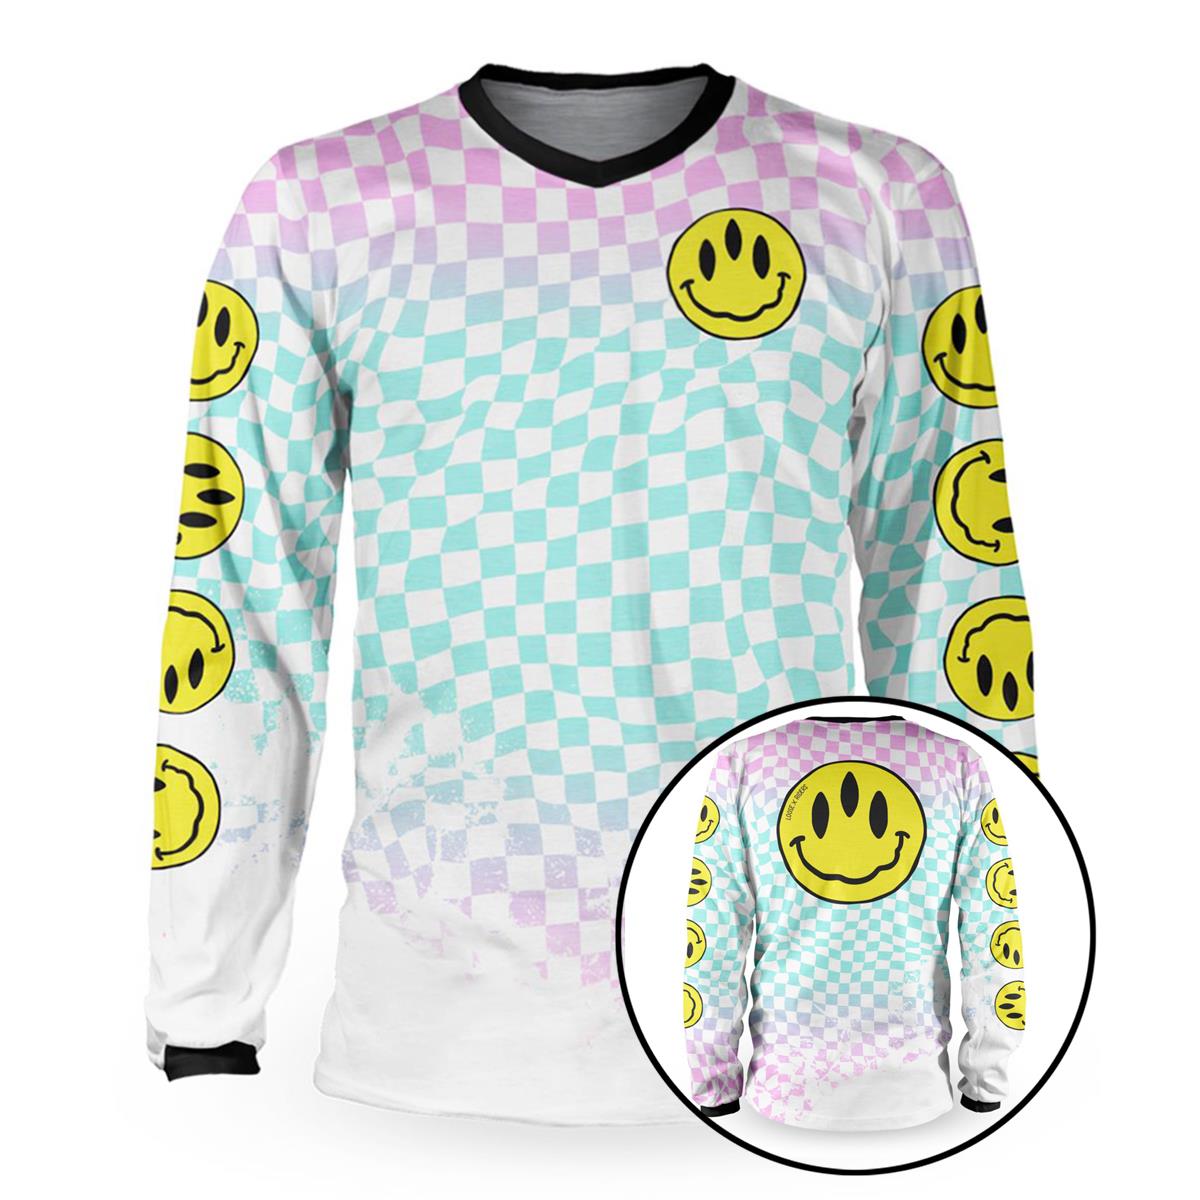 Loose Riders Downhill Jersey Long Sleeve Cult Of Shred Stoked! 80's White/Turquoise/Pink